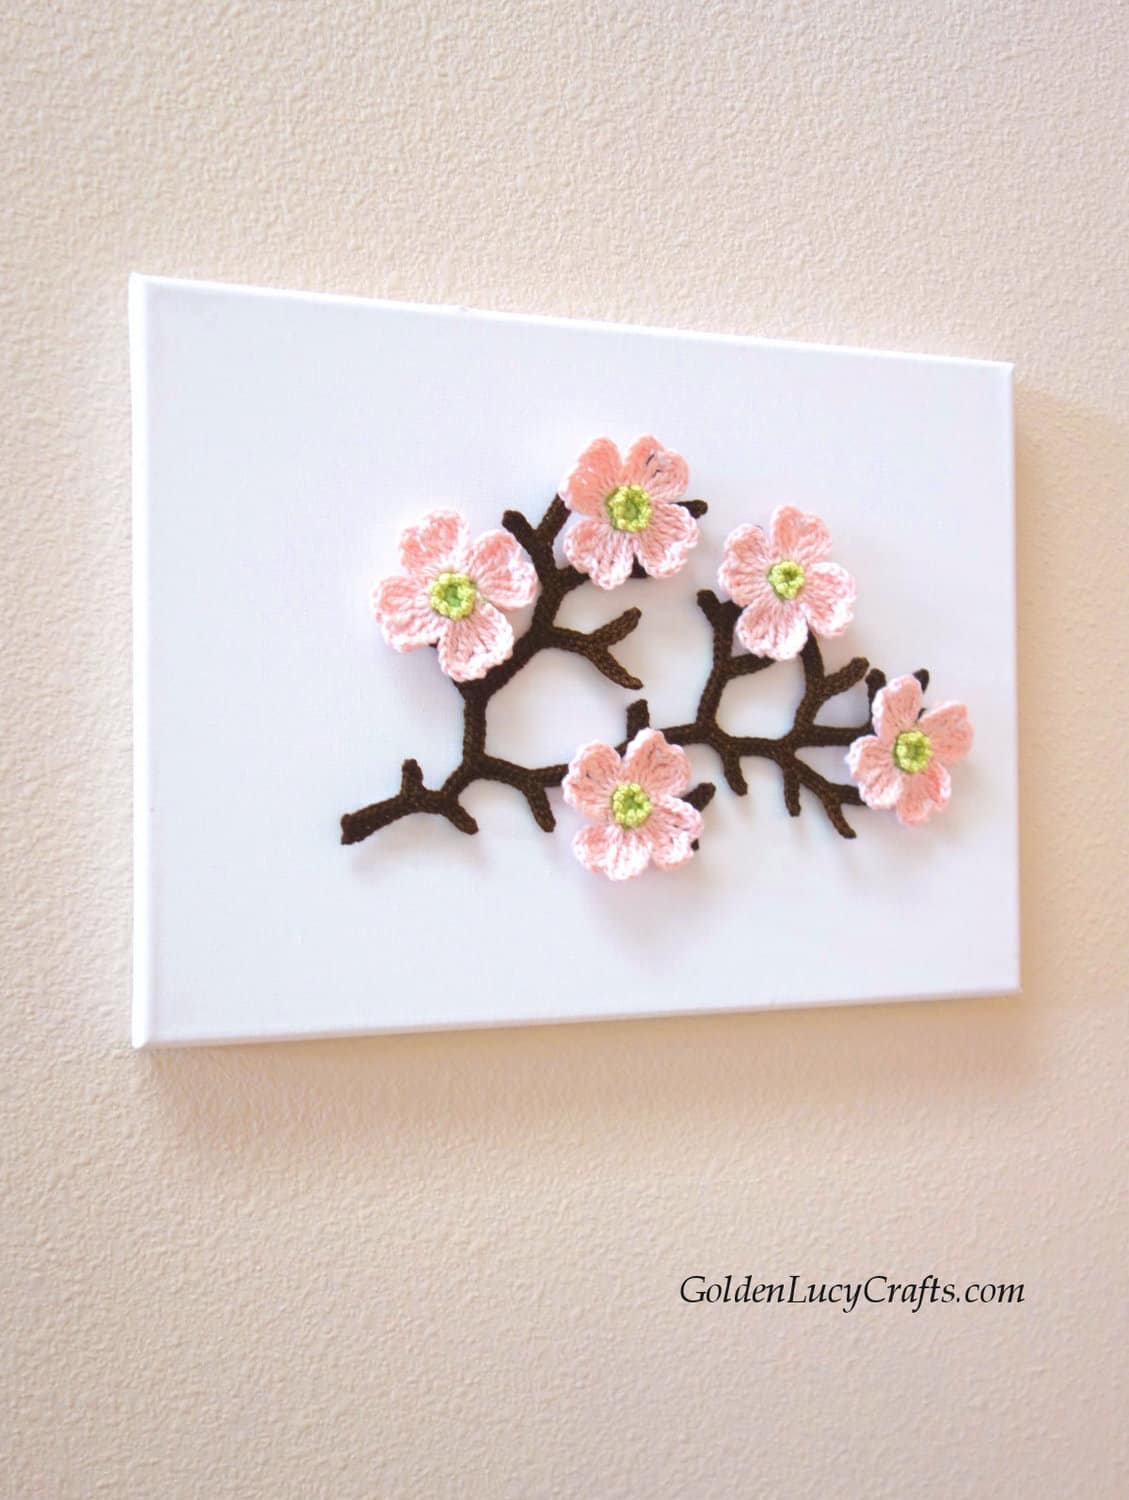 Crochet branch with dogwood flowers on canvas.